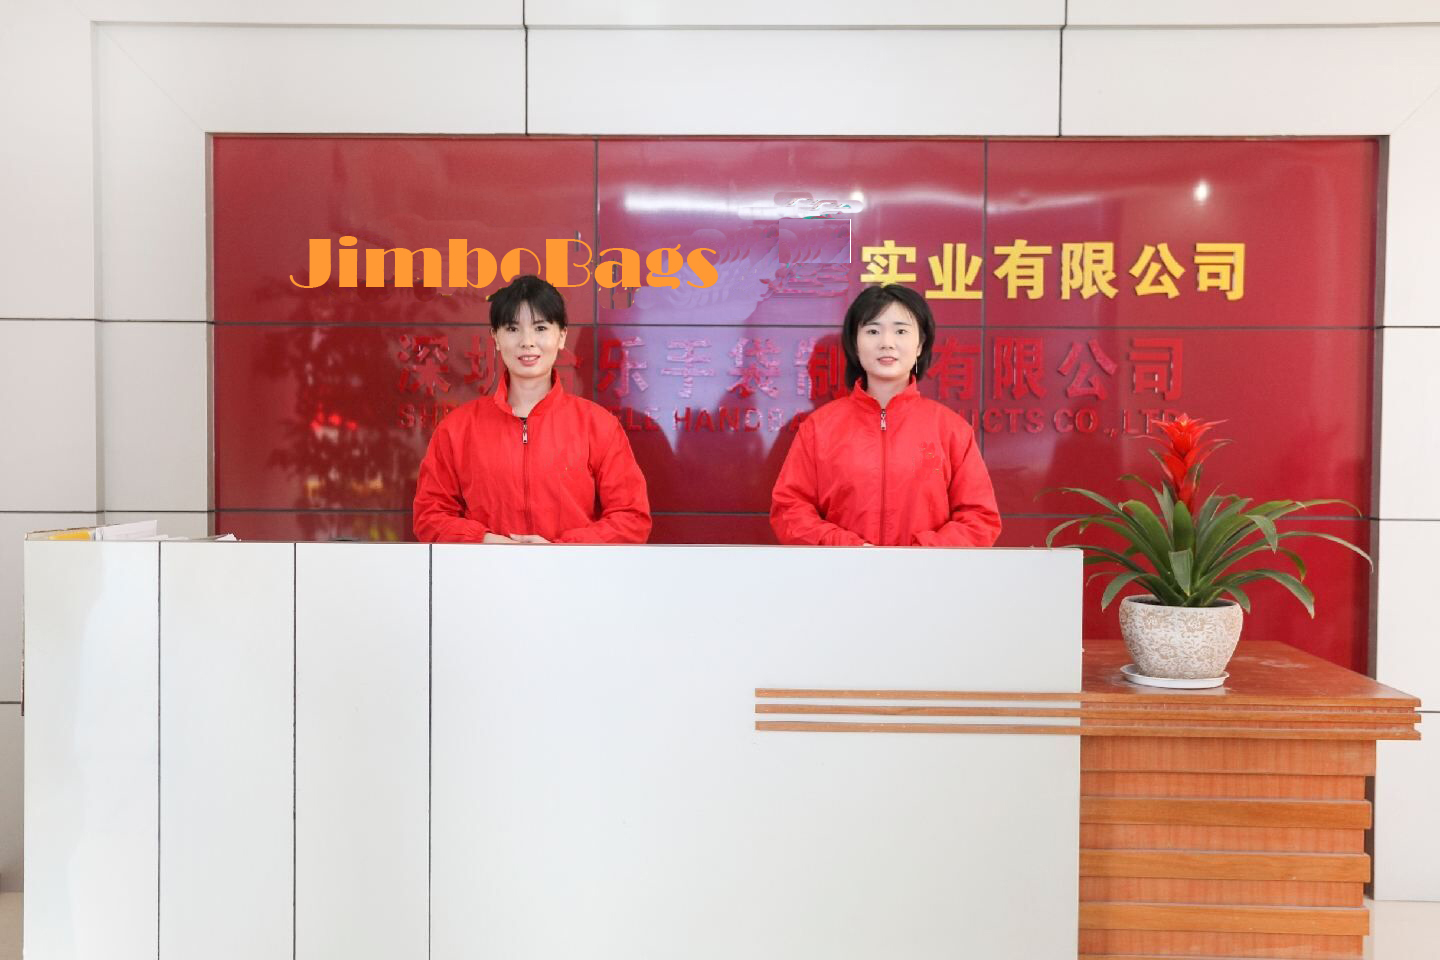 Reception desk JimboBags for contact and visit